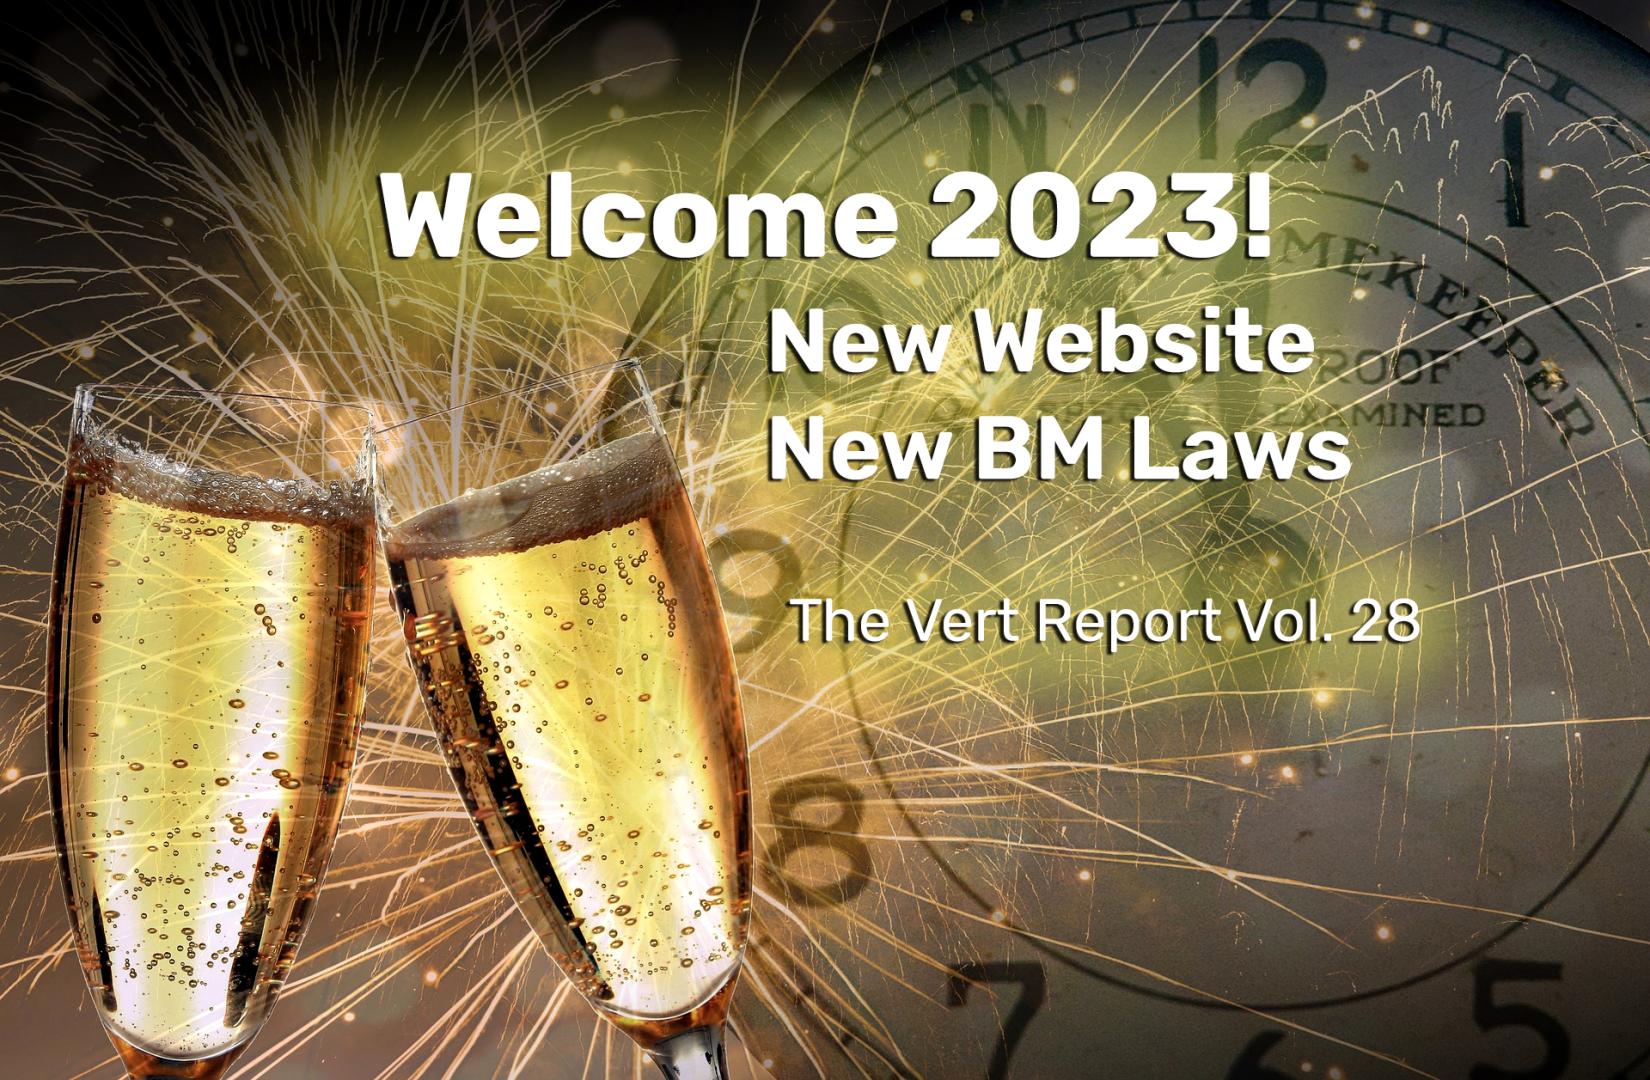 Vert Energy Group – Ringing in the New Year with a New Website and New BM Laws